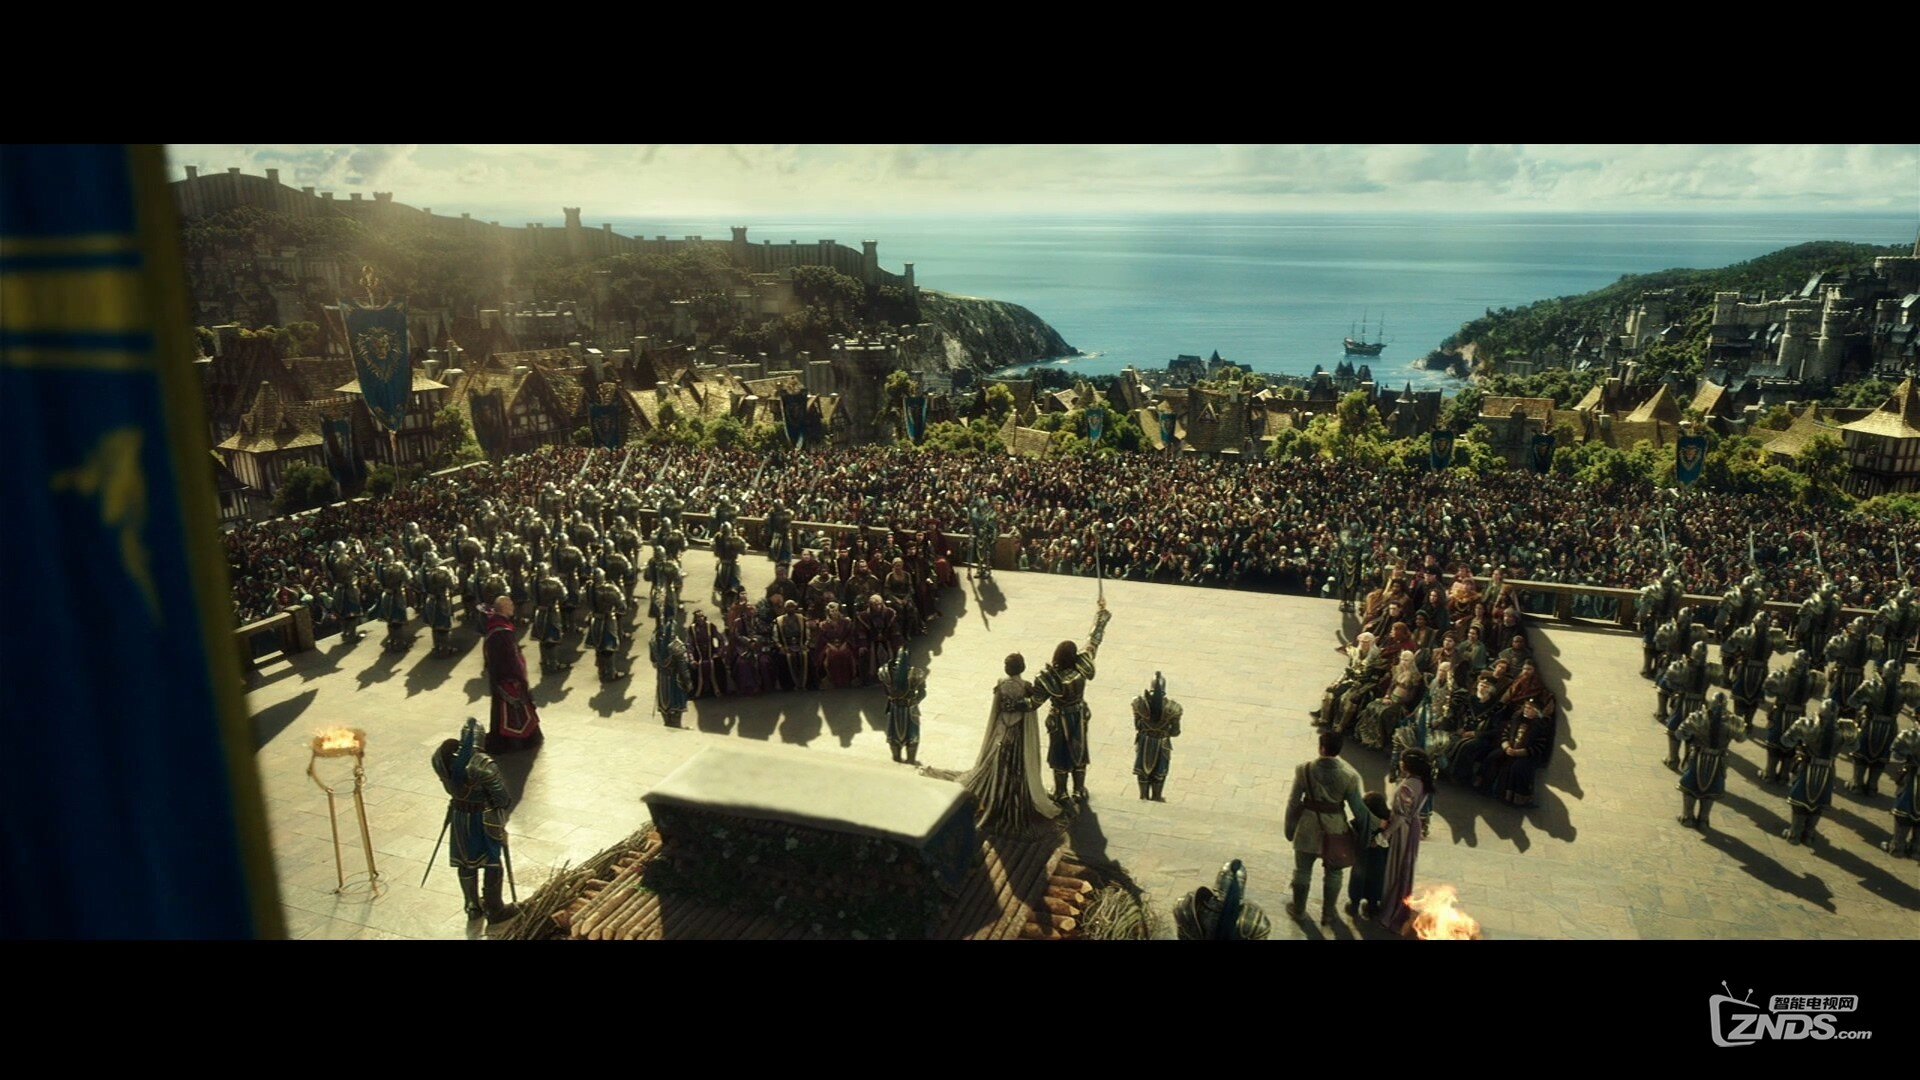 Warcraft_Trailer1_Texted_Stereo_PCM_1080p.mov_20160214_211801.015.jpg